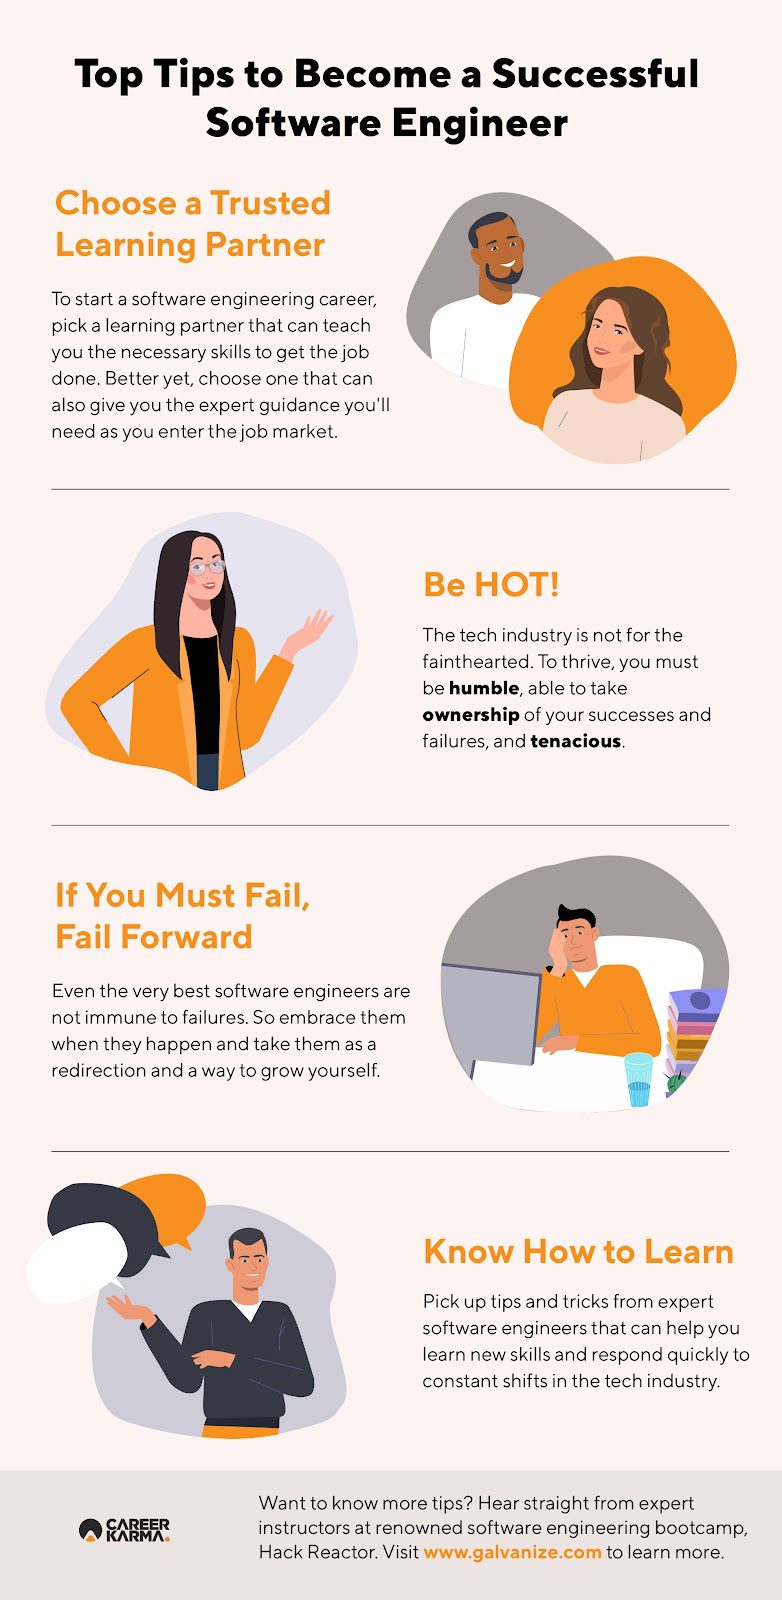 An infographic highlighting top tips to become a successful software engineer